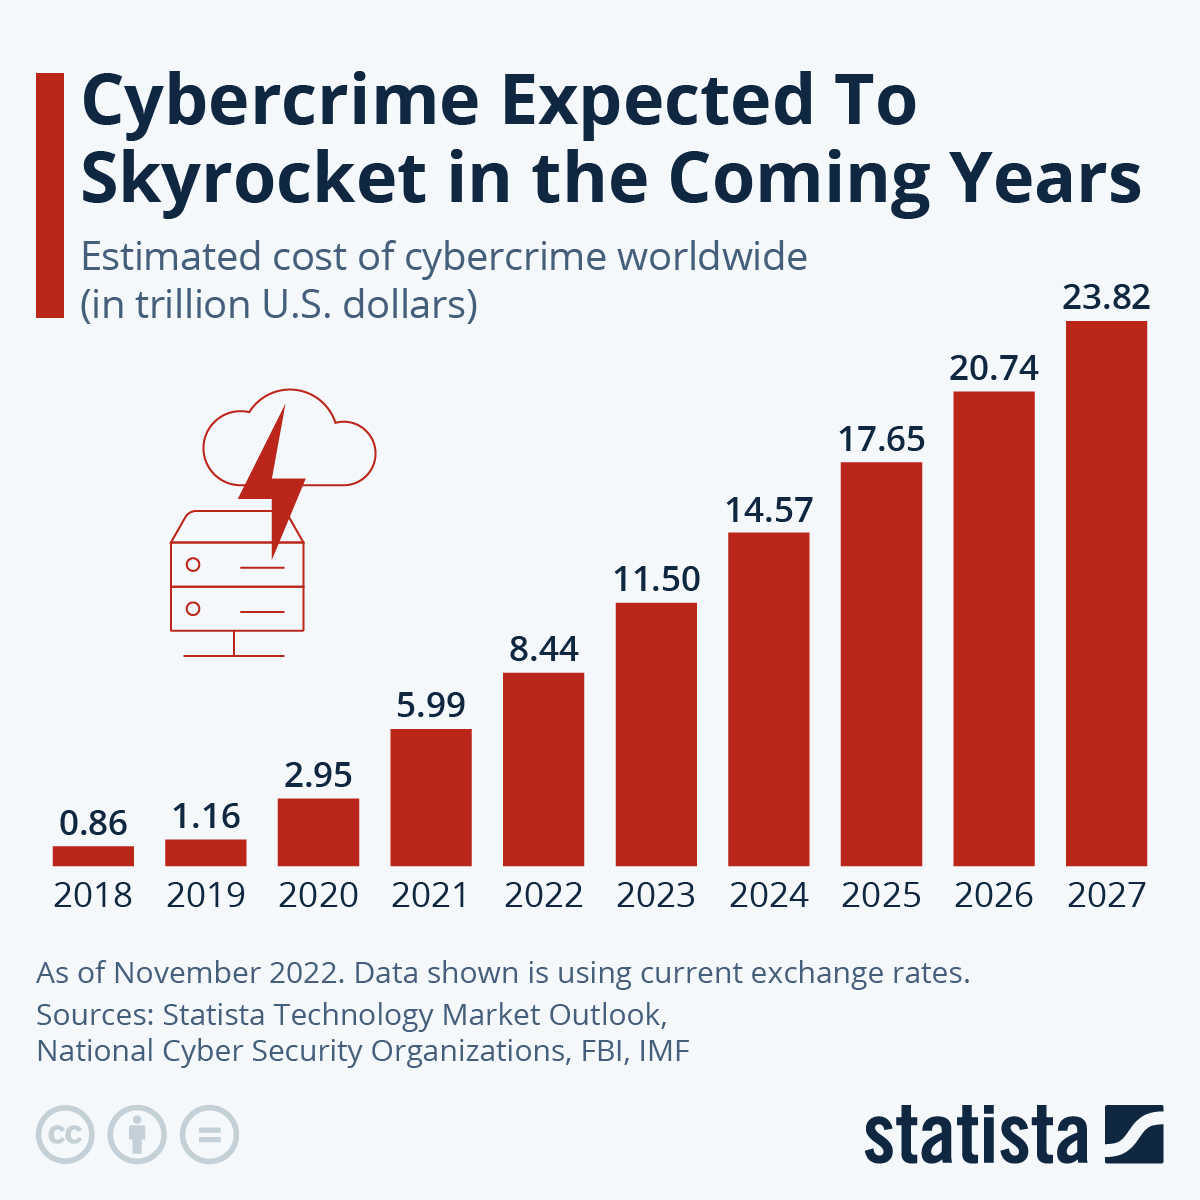 This chart shows the expected cost of cybercrime until 2027.